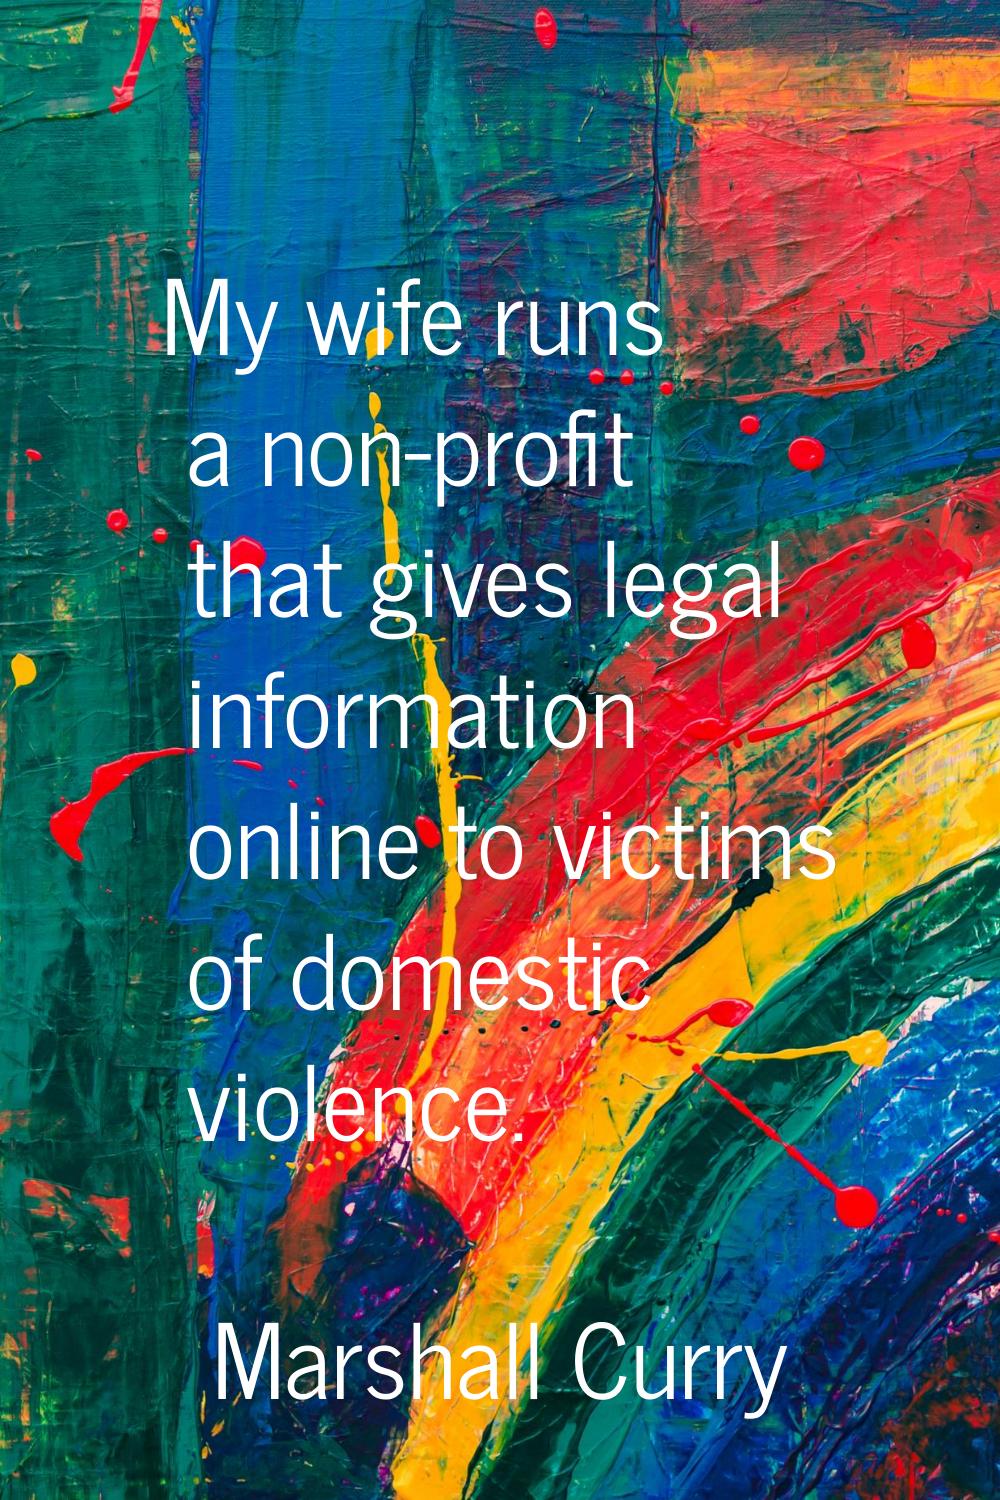 My wife runs a non-profit that gives legal information online to victims of domestic violence.